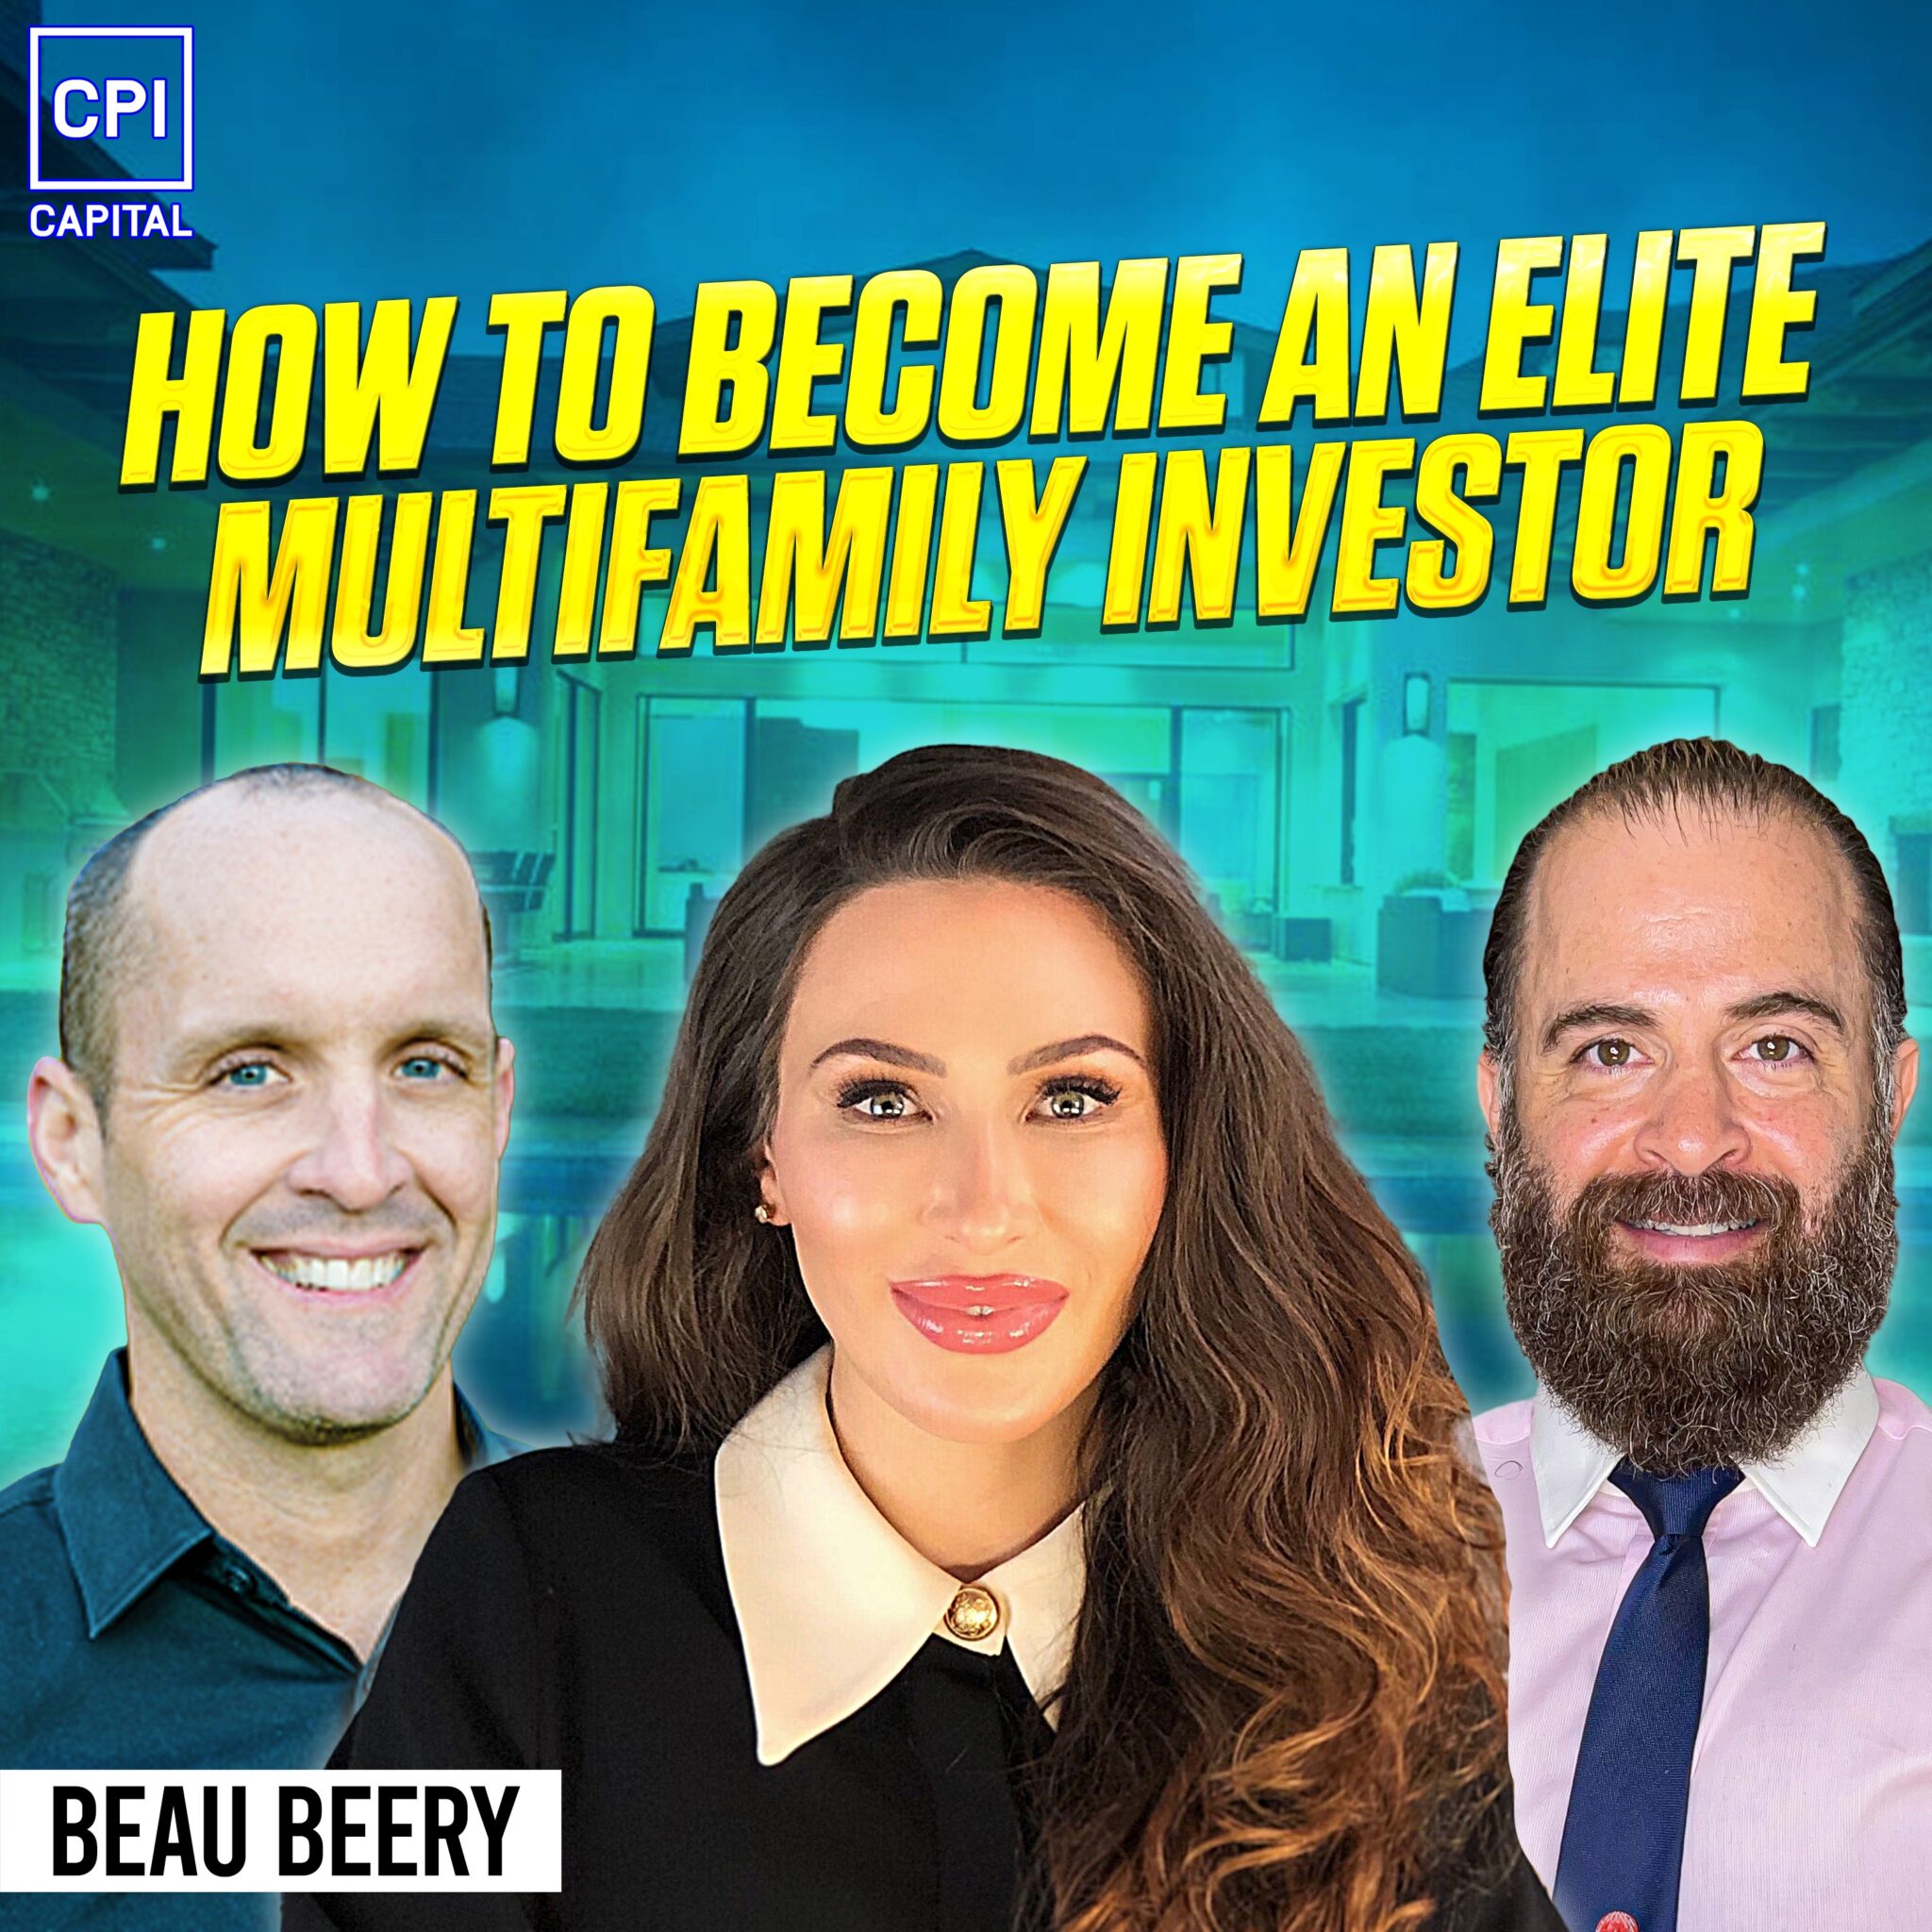 How To Become An Elite Multifamily Investor – Beau Beery